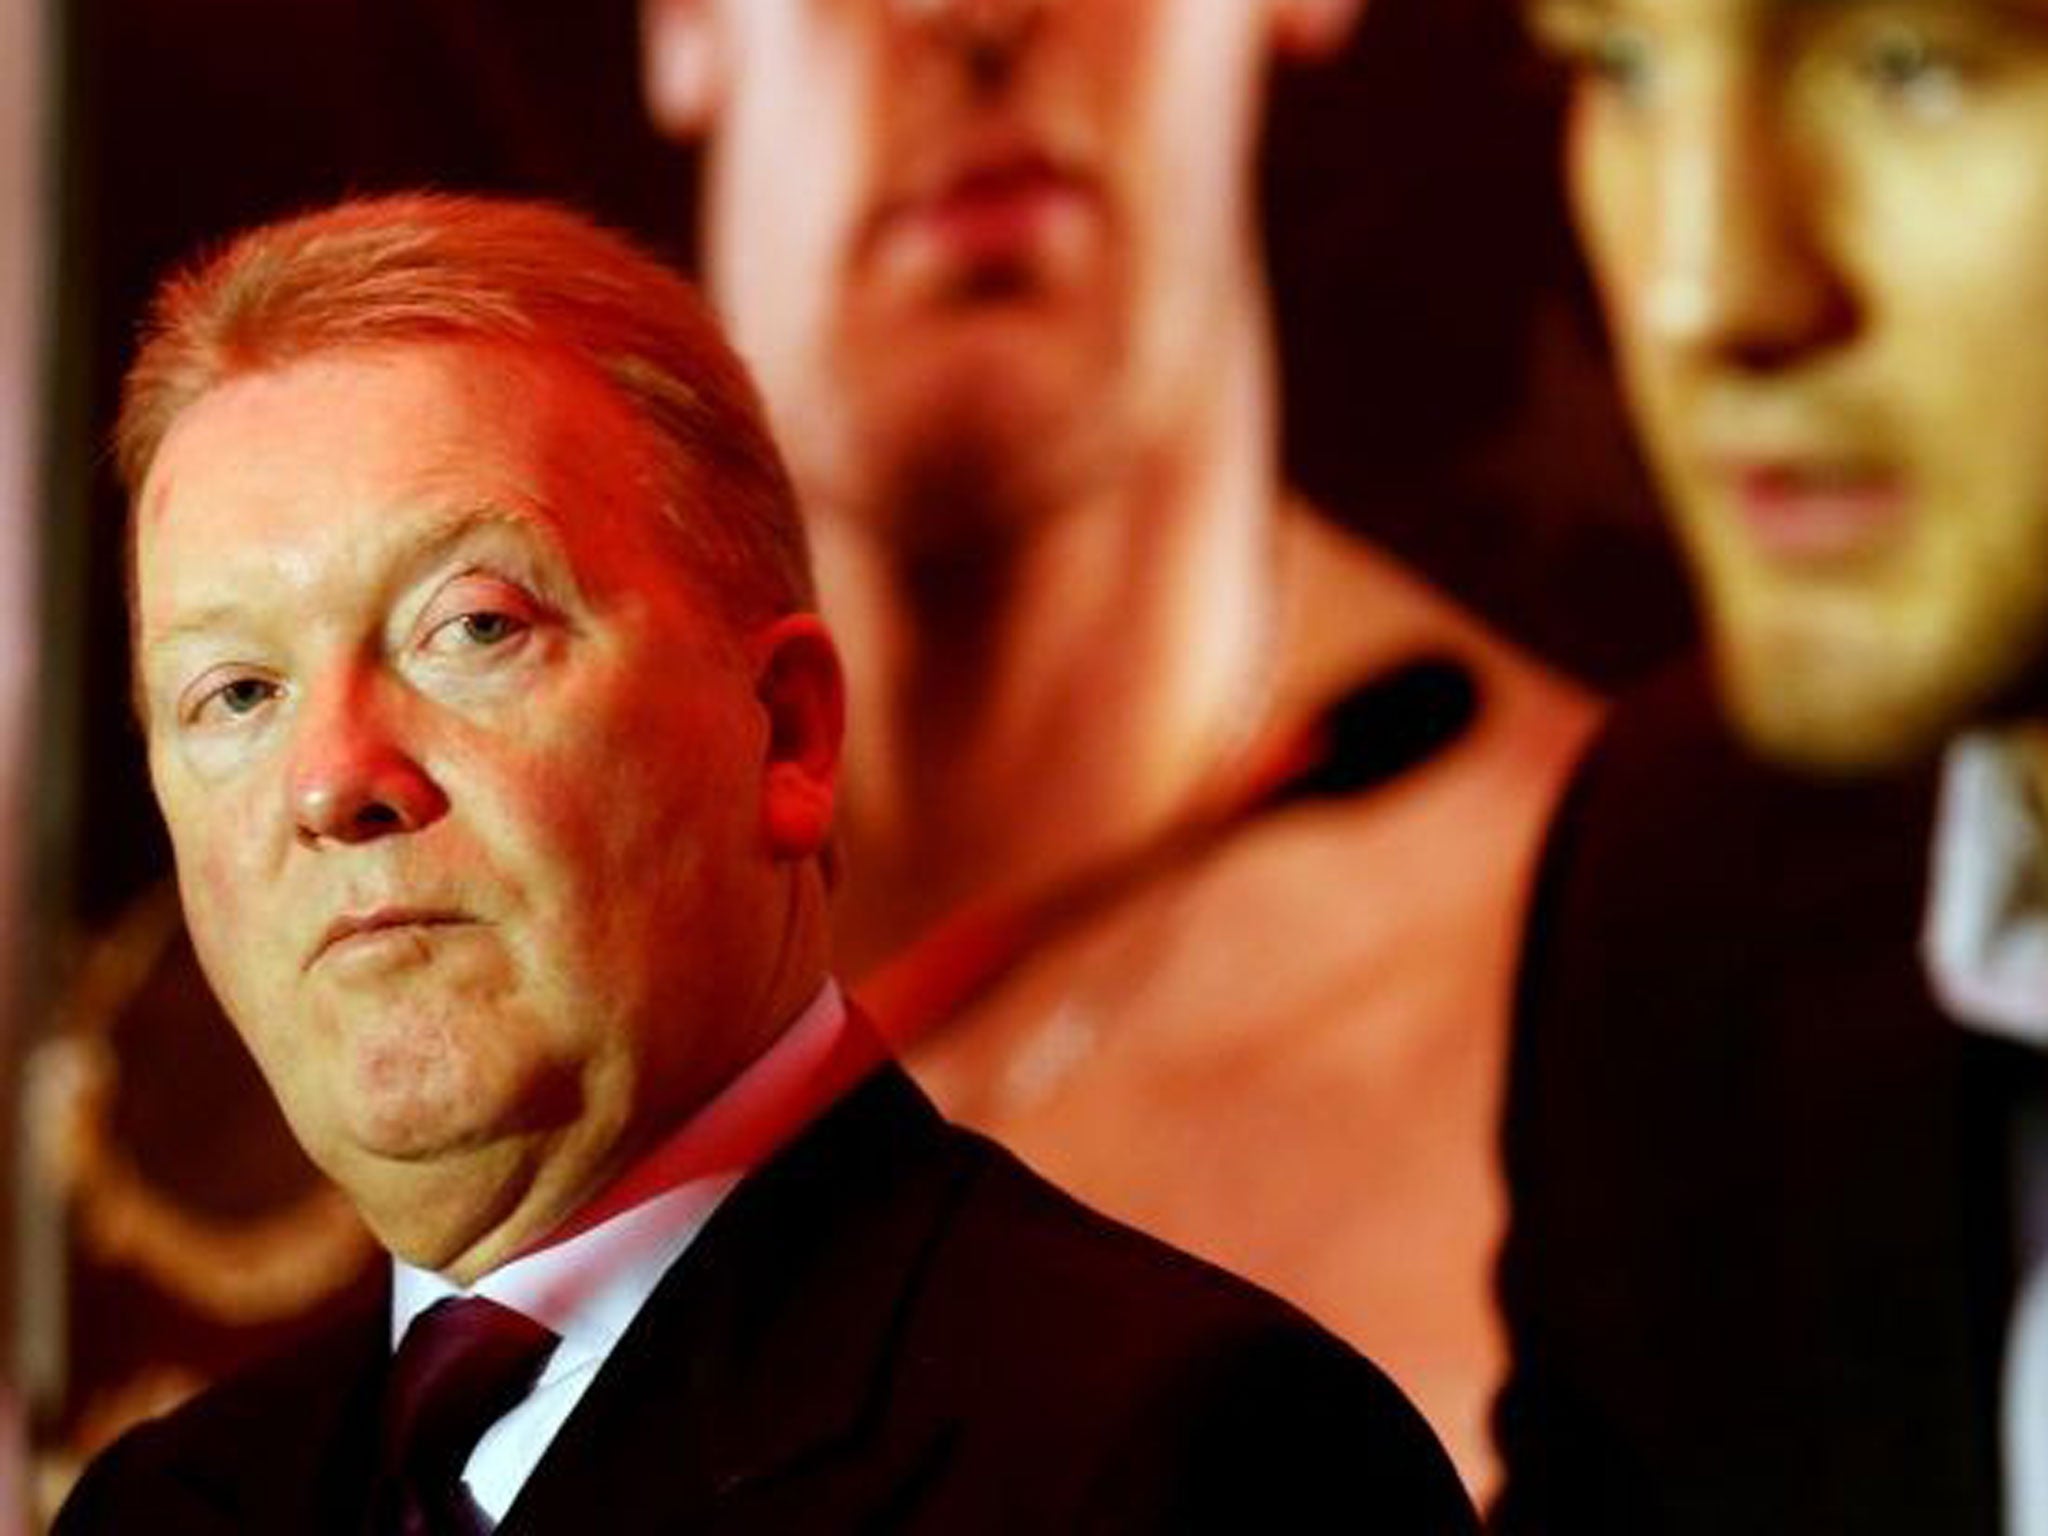 On the ropes?: Frank Warren was due to promote George Groves next Saturday before the fighter moved to the stable run by Eddie Hearn